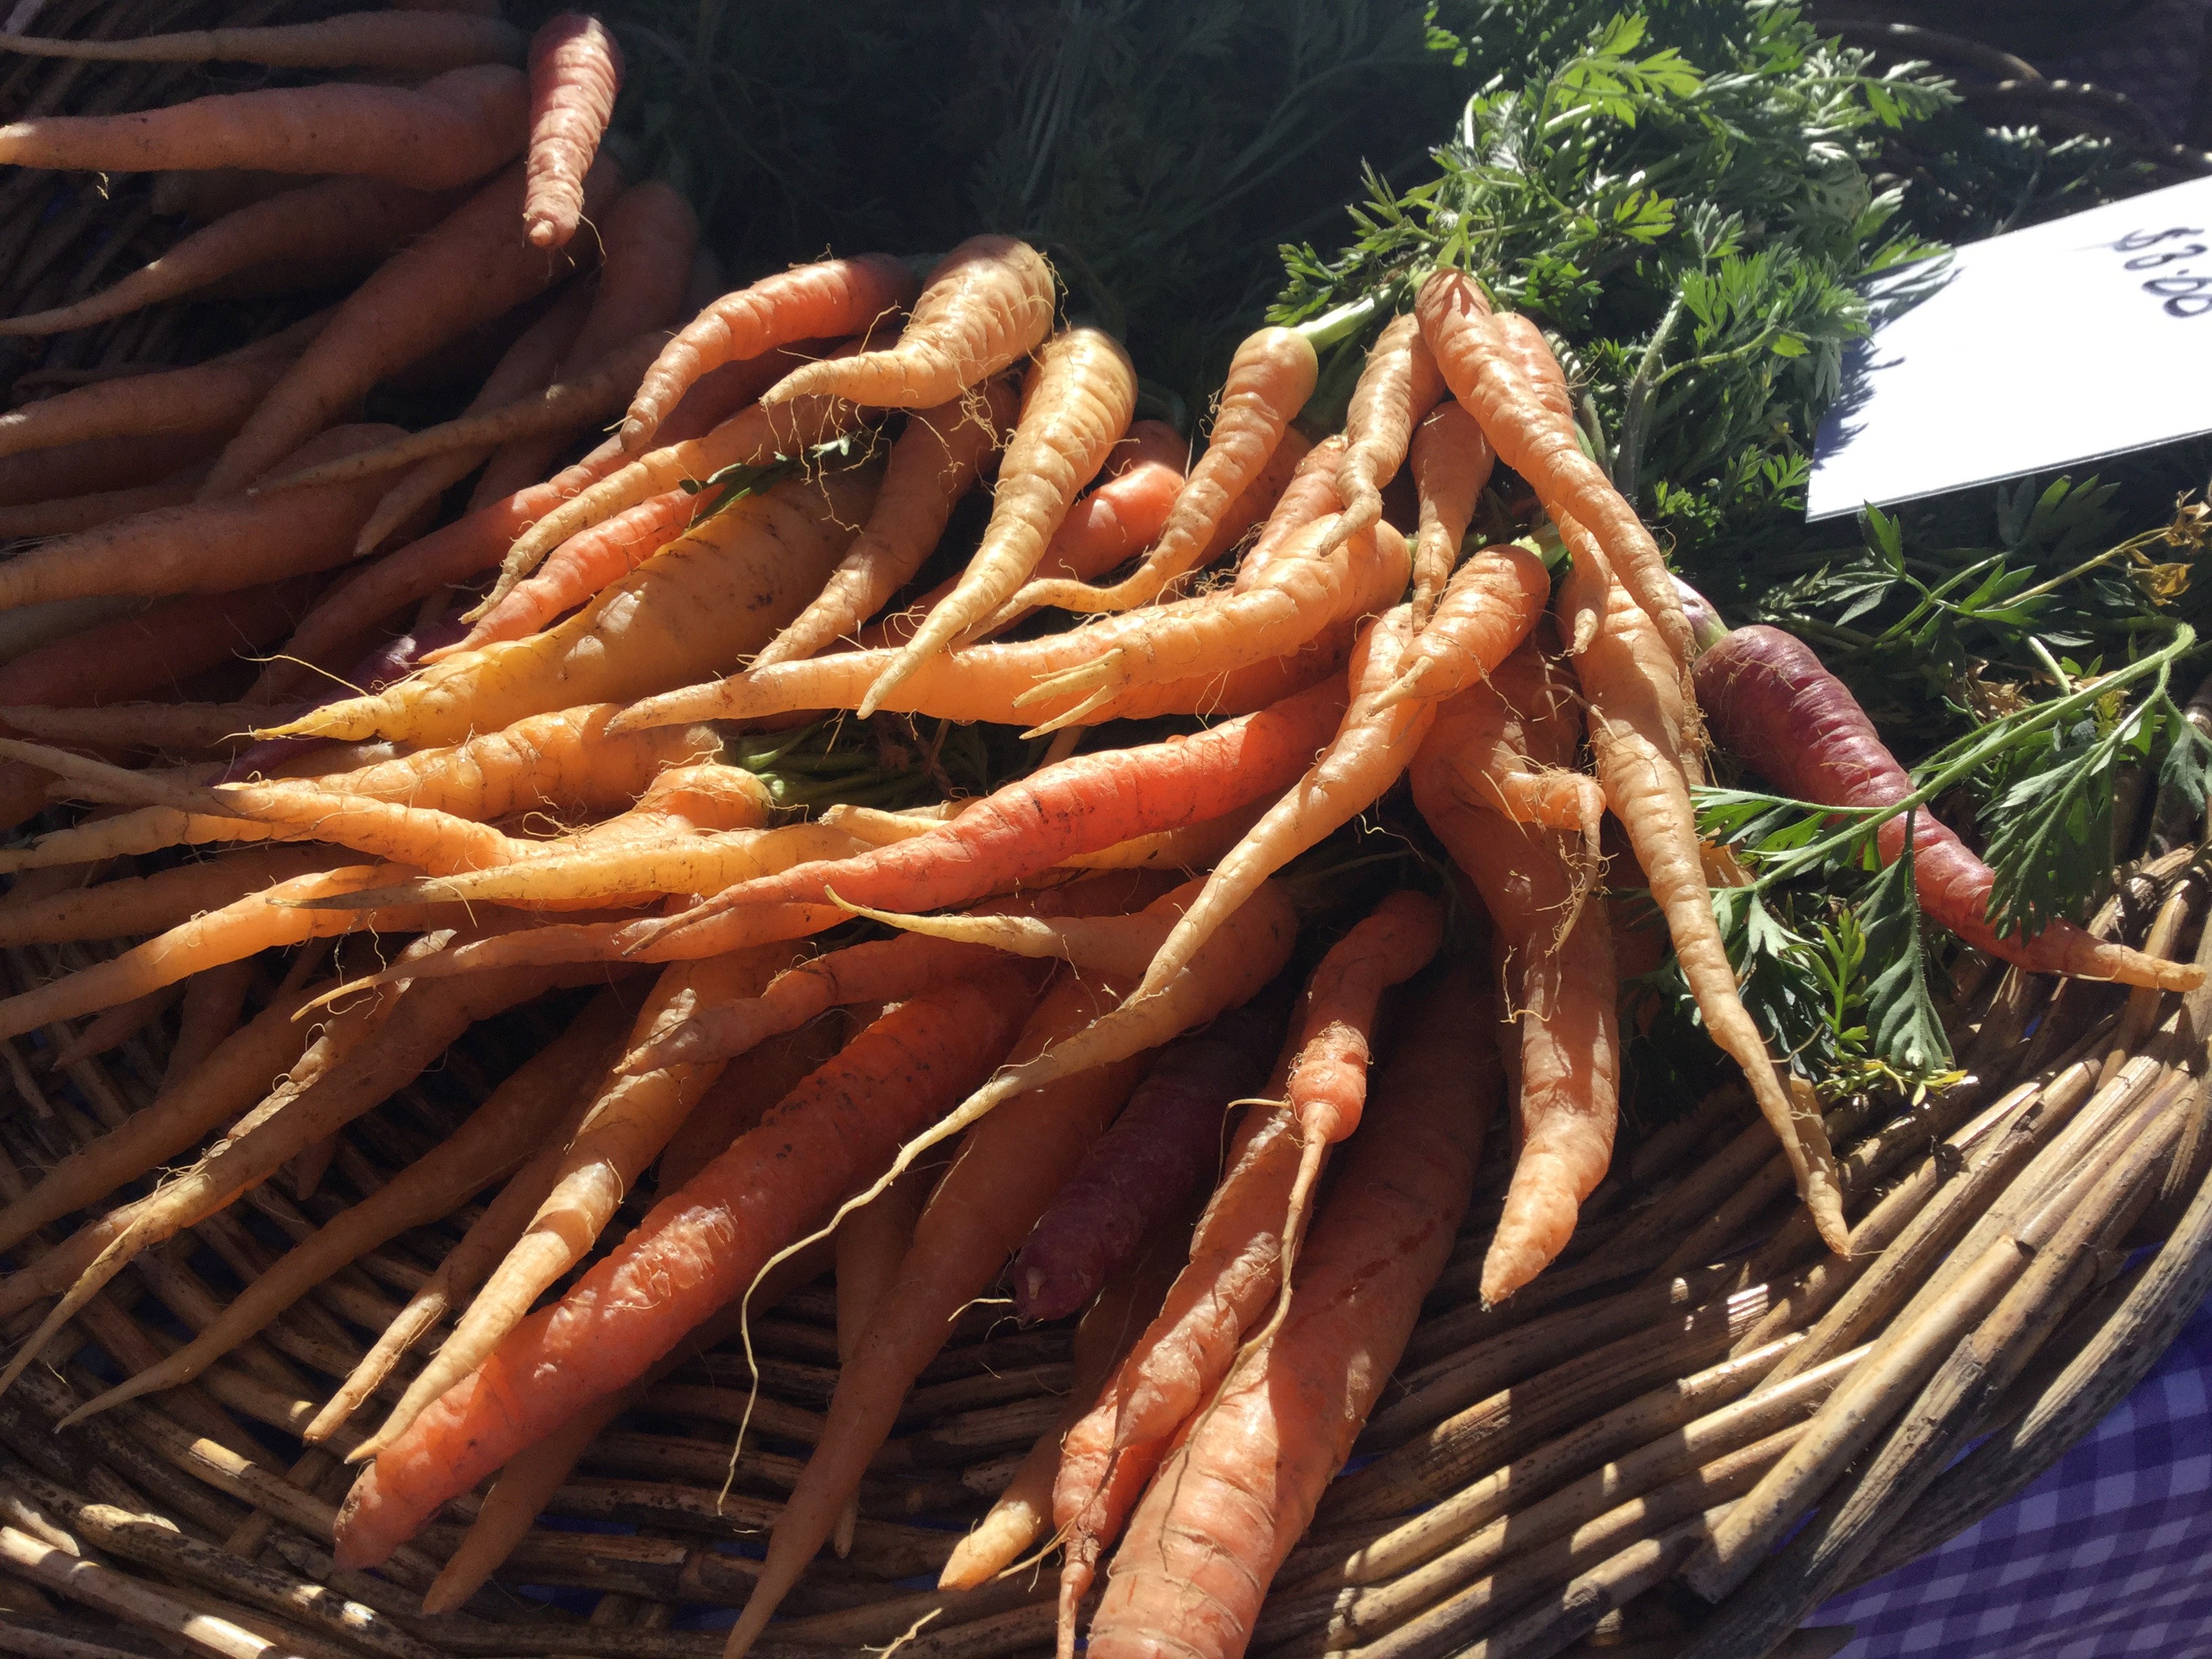 Notes from the Kitchen Garden: cultivating crunchy carrots and perfect parsnips